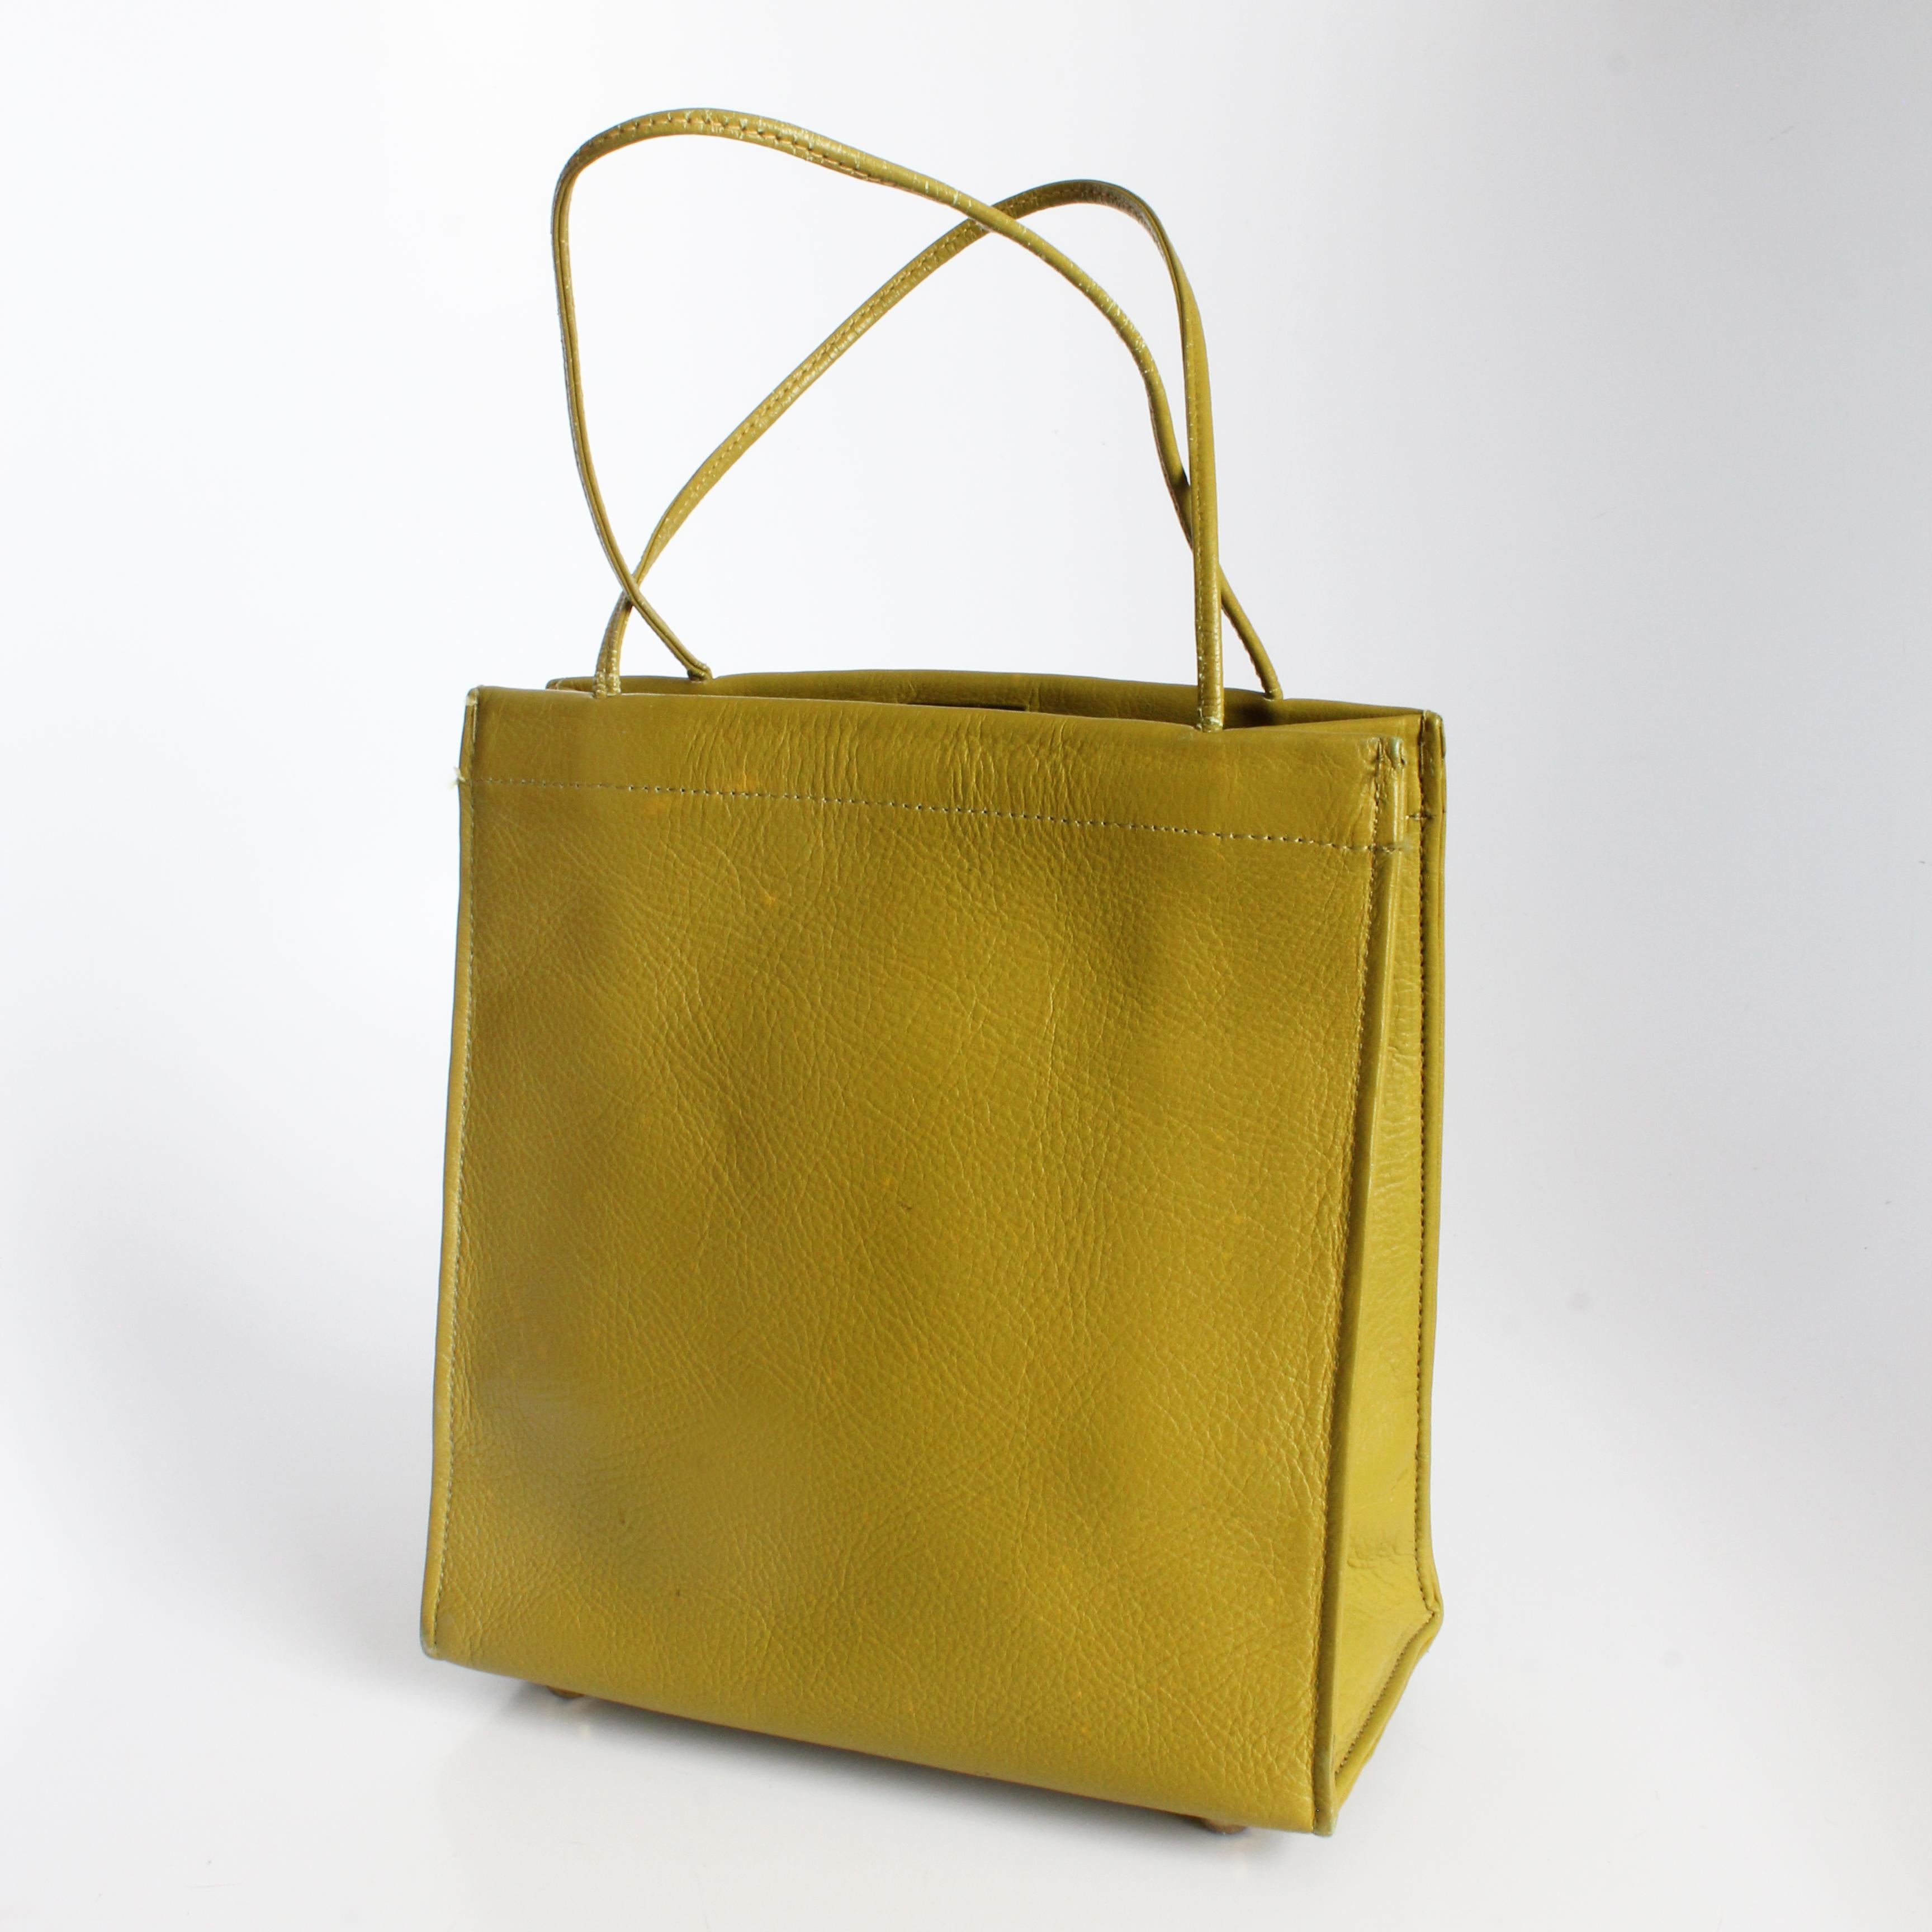 Bonnie Cashin for Coach Tiny Shopping Bag Tote Mimosa Leather Rare Vintage 1960s For Sale 2